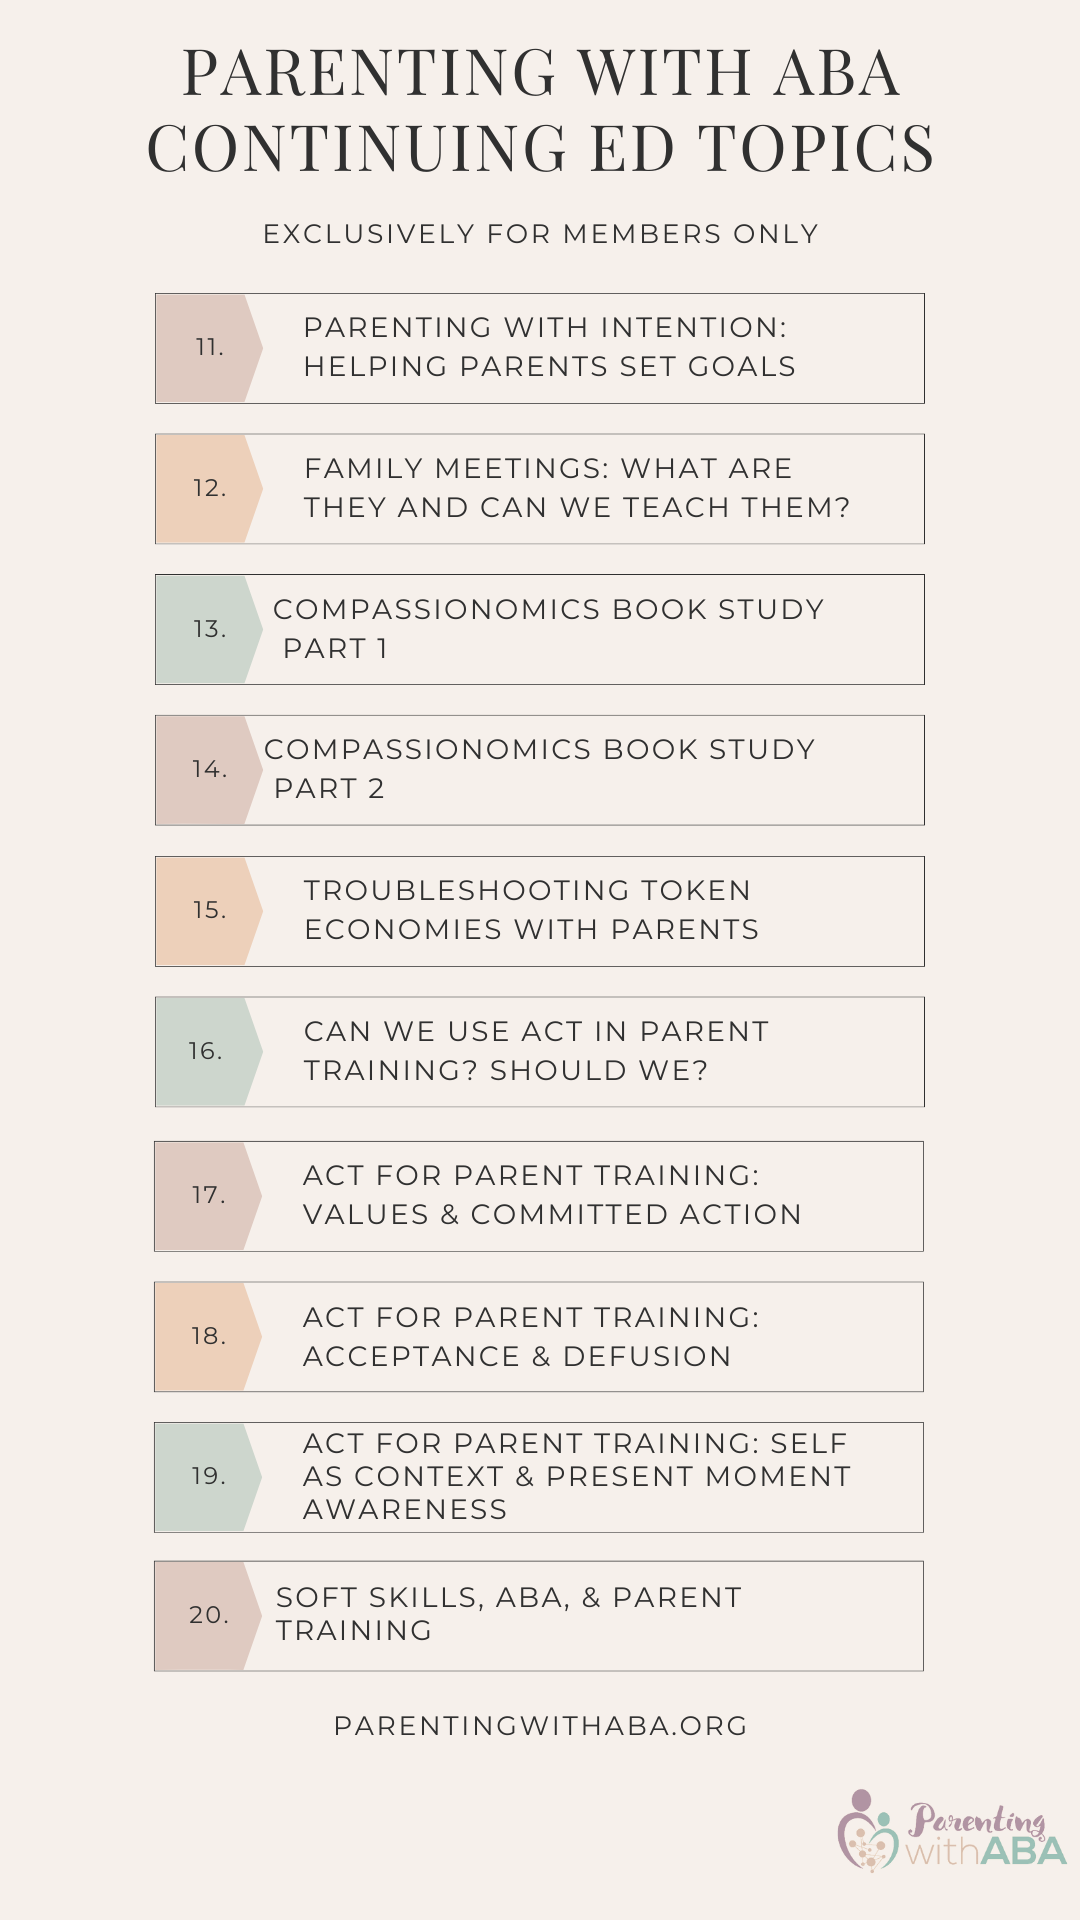 List of topics for ABA continuing education for parent training